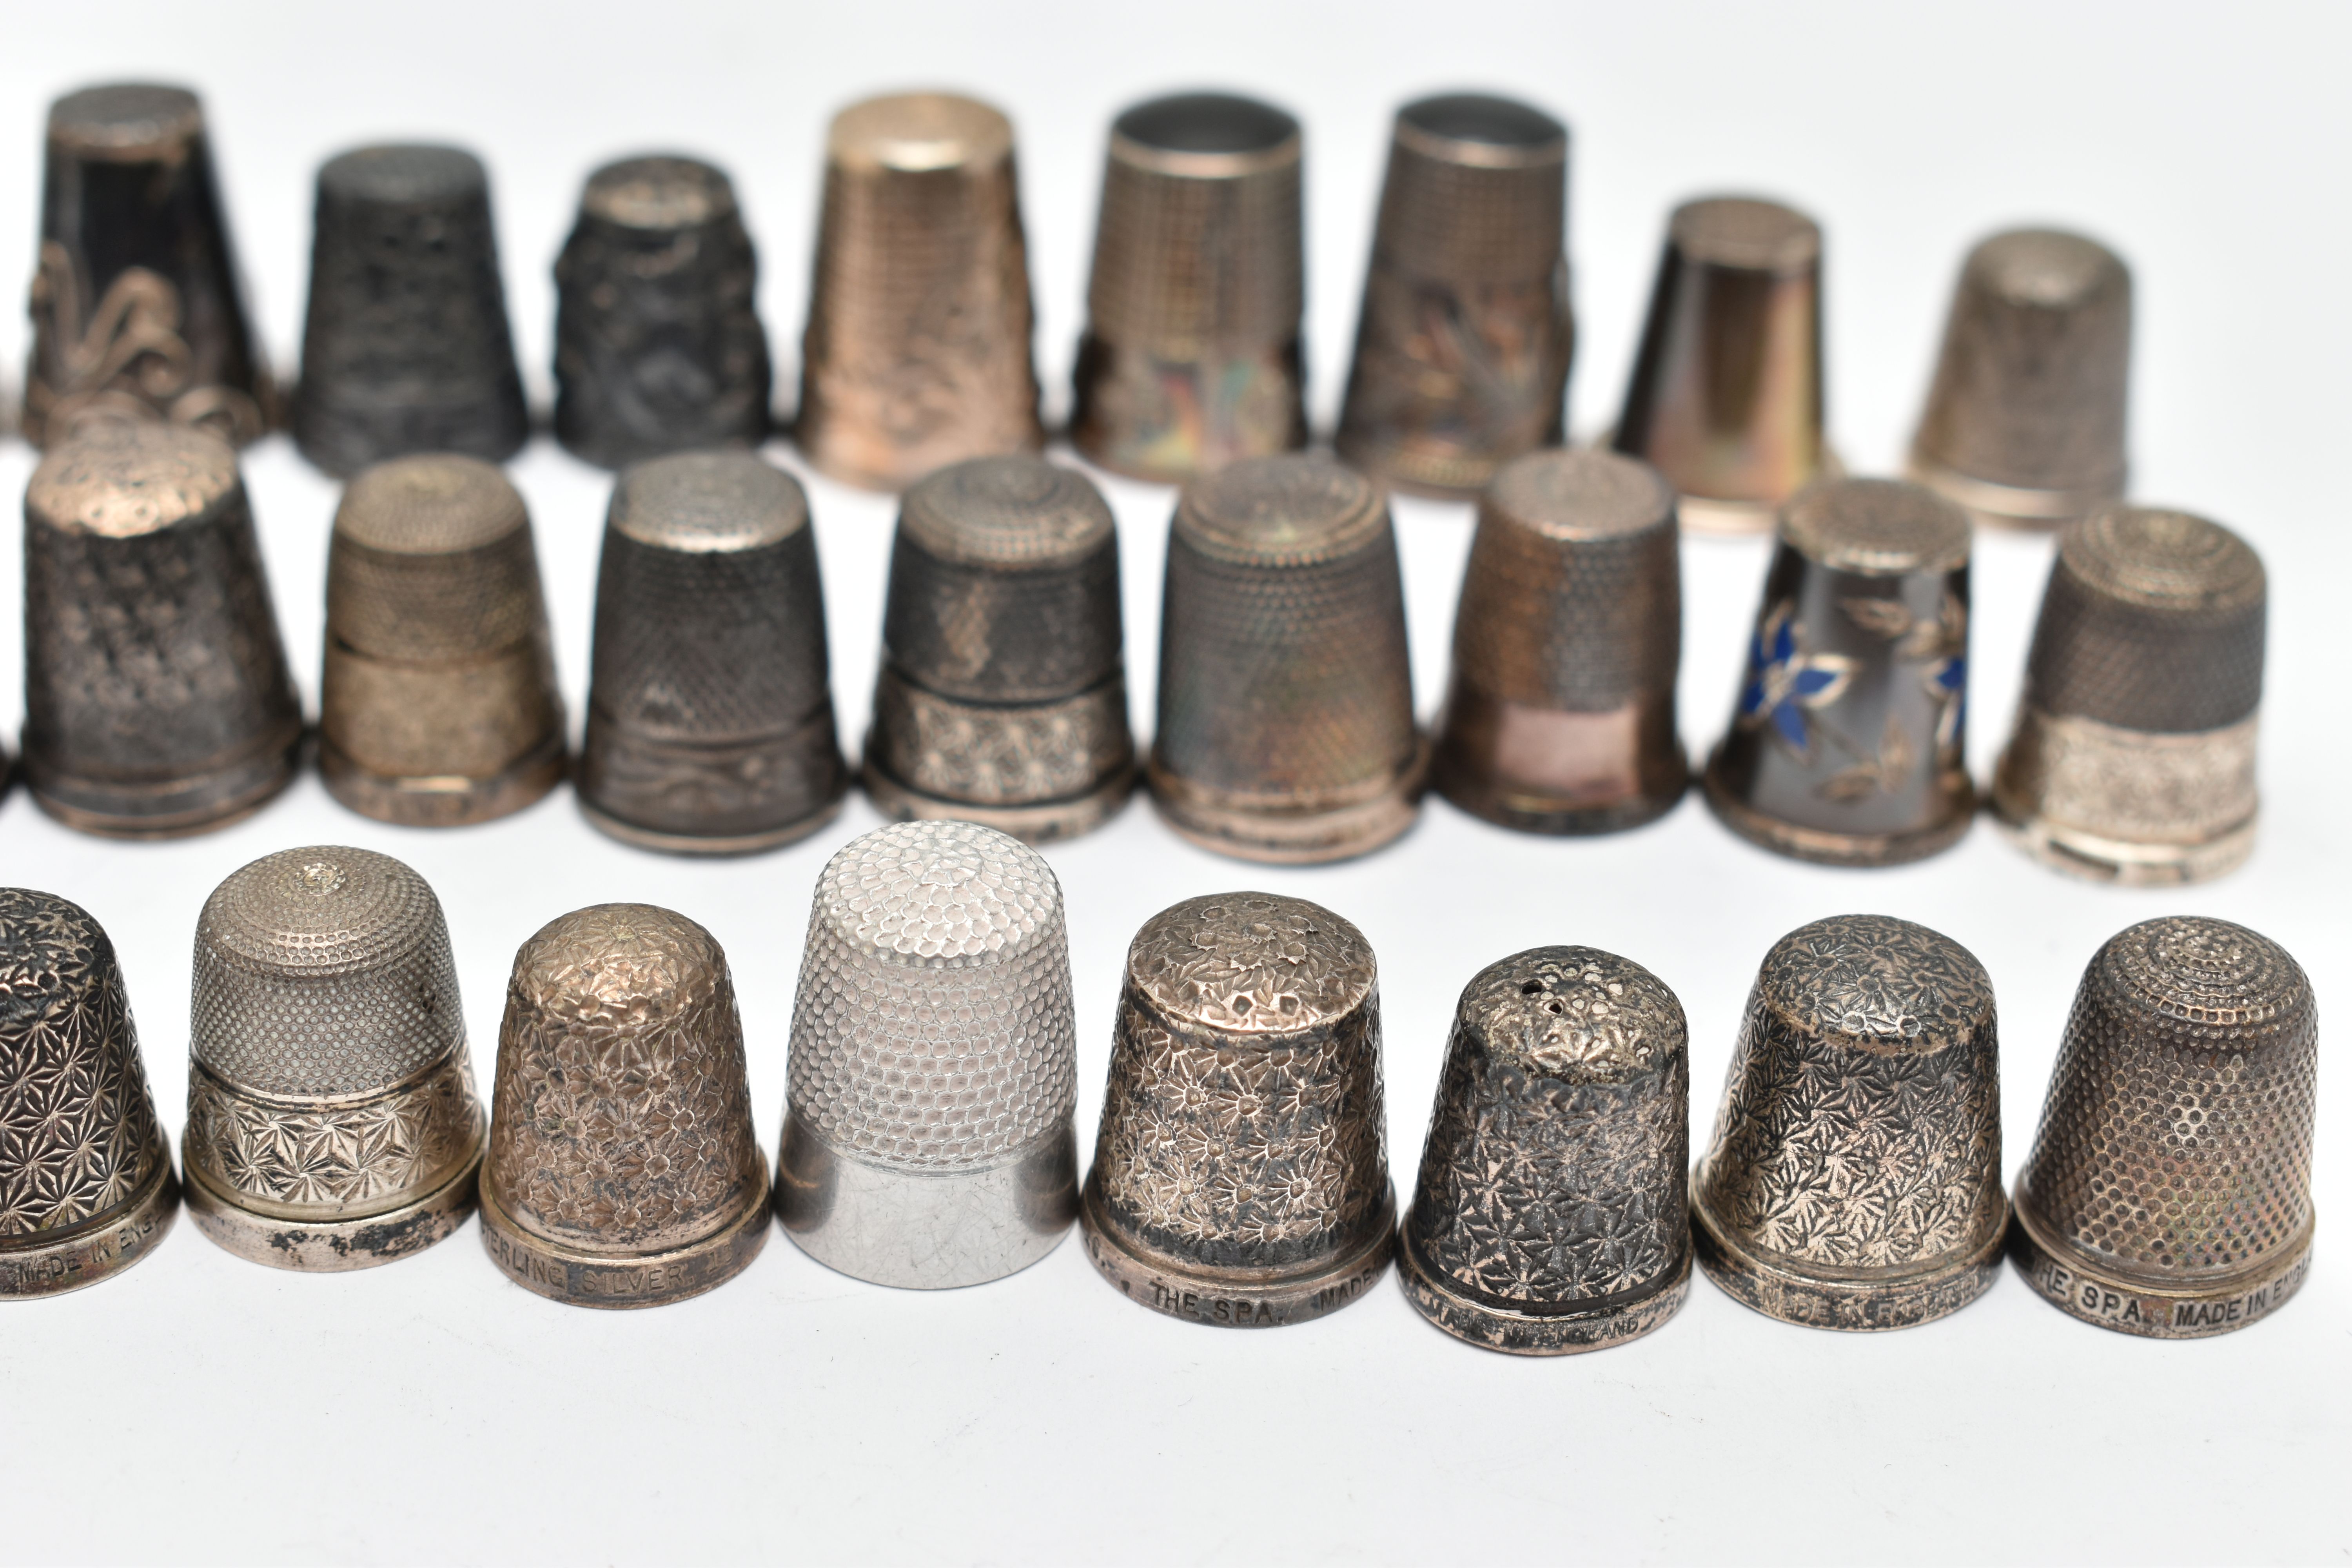 A BAG OF WHITE METAL THIMBLES, various designs and patterns, some set with semi-precious stone - Image 5 of 10